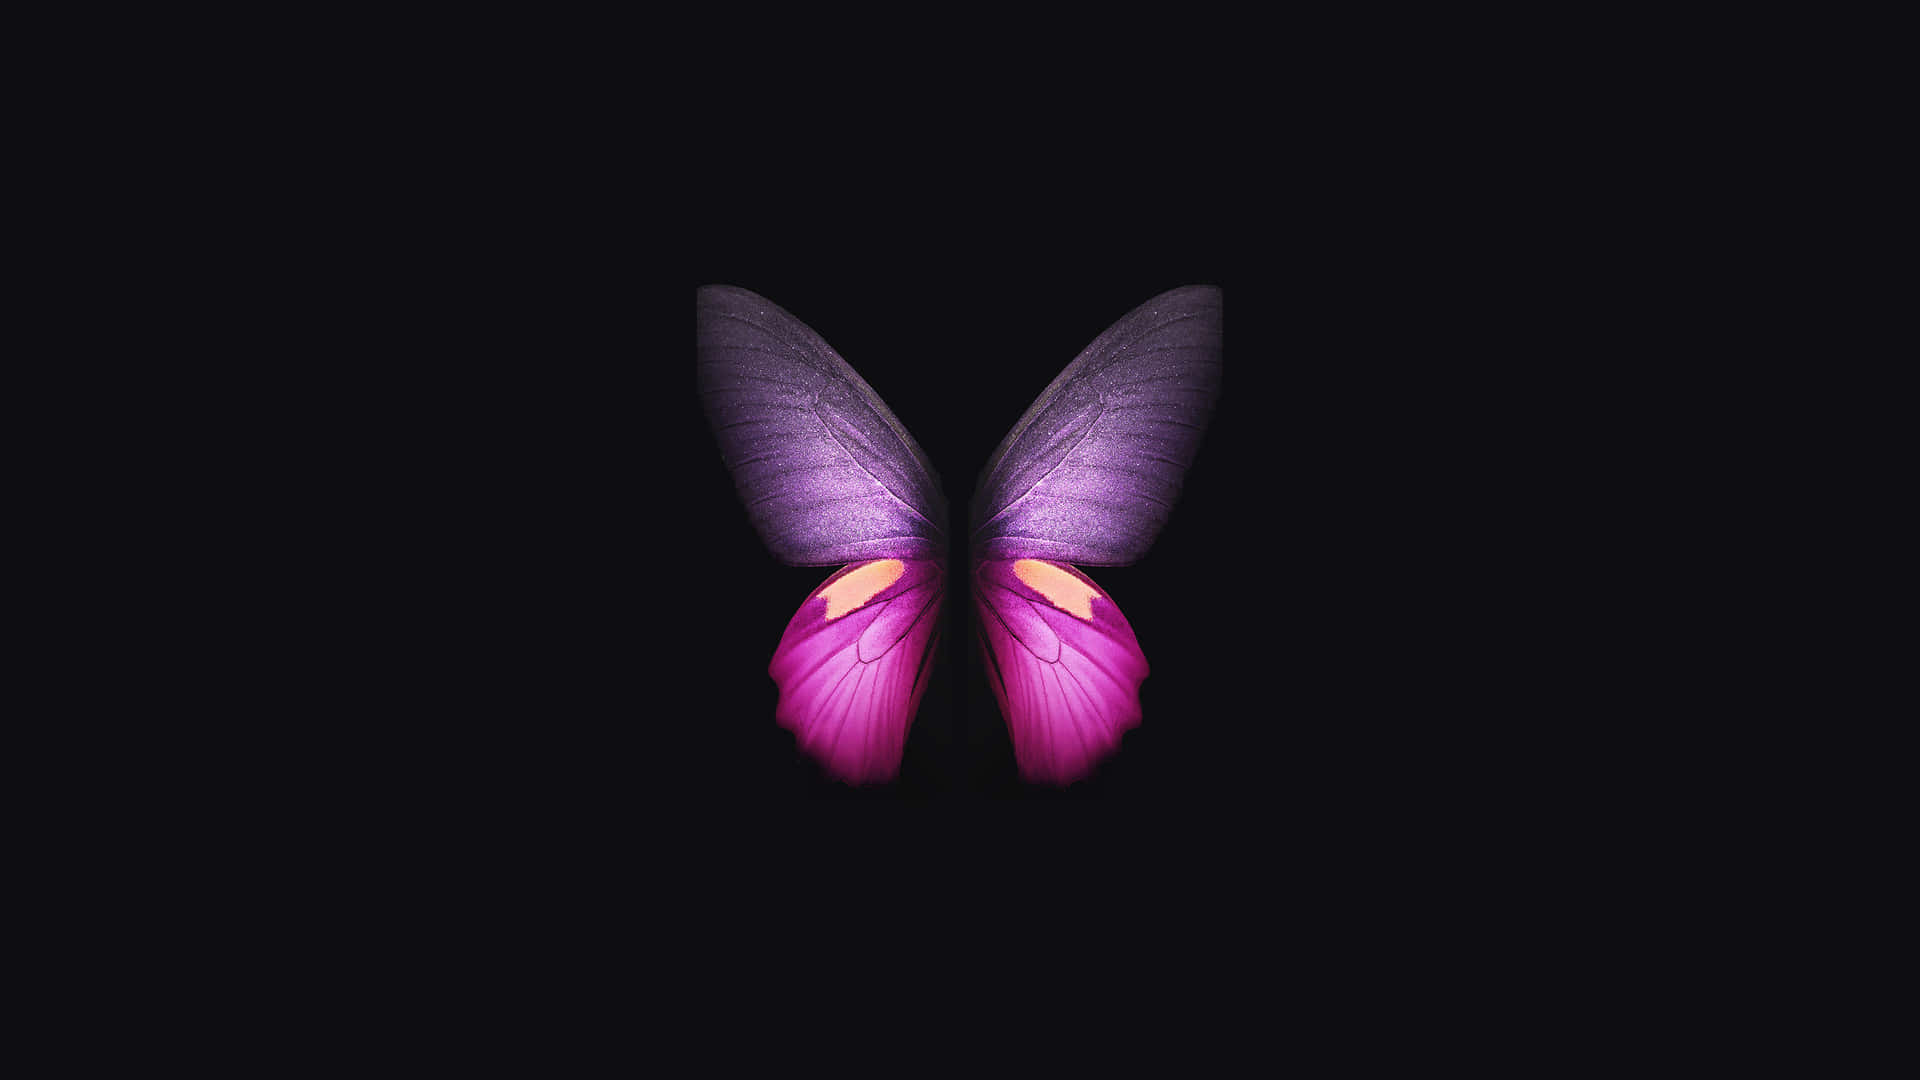 A Purple Butterfly Is Shown On A Black Background Wallpaper